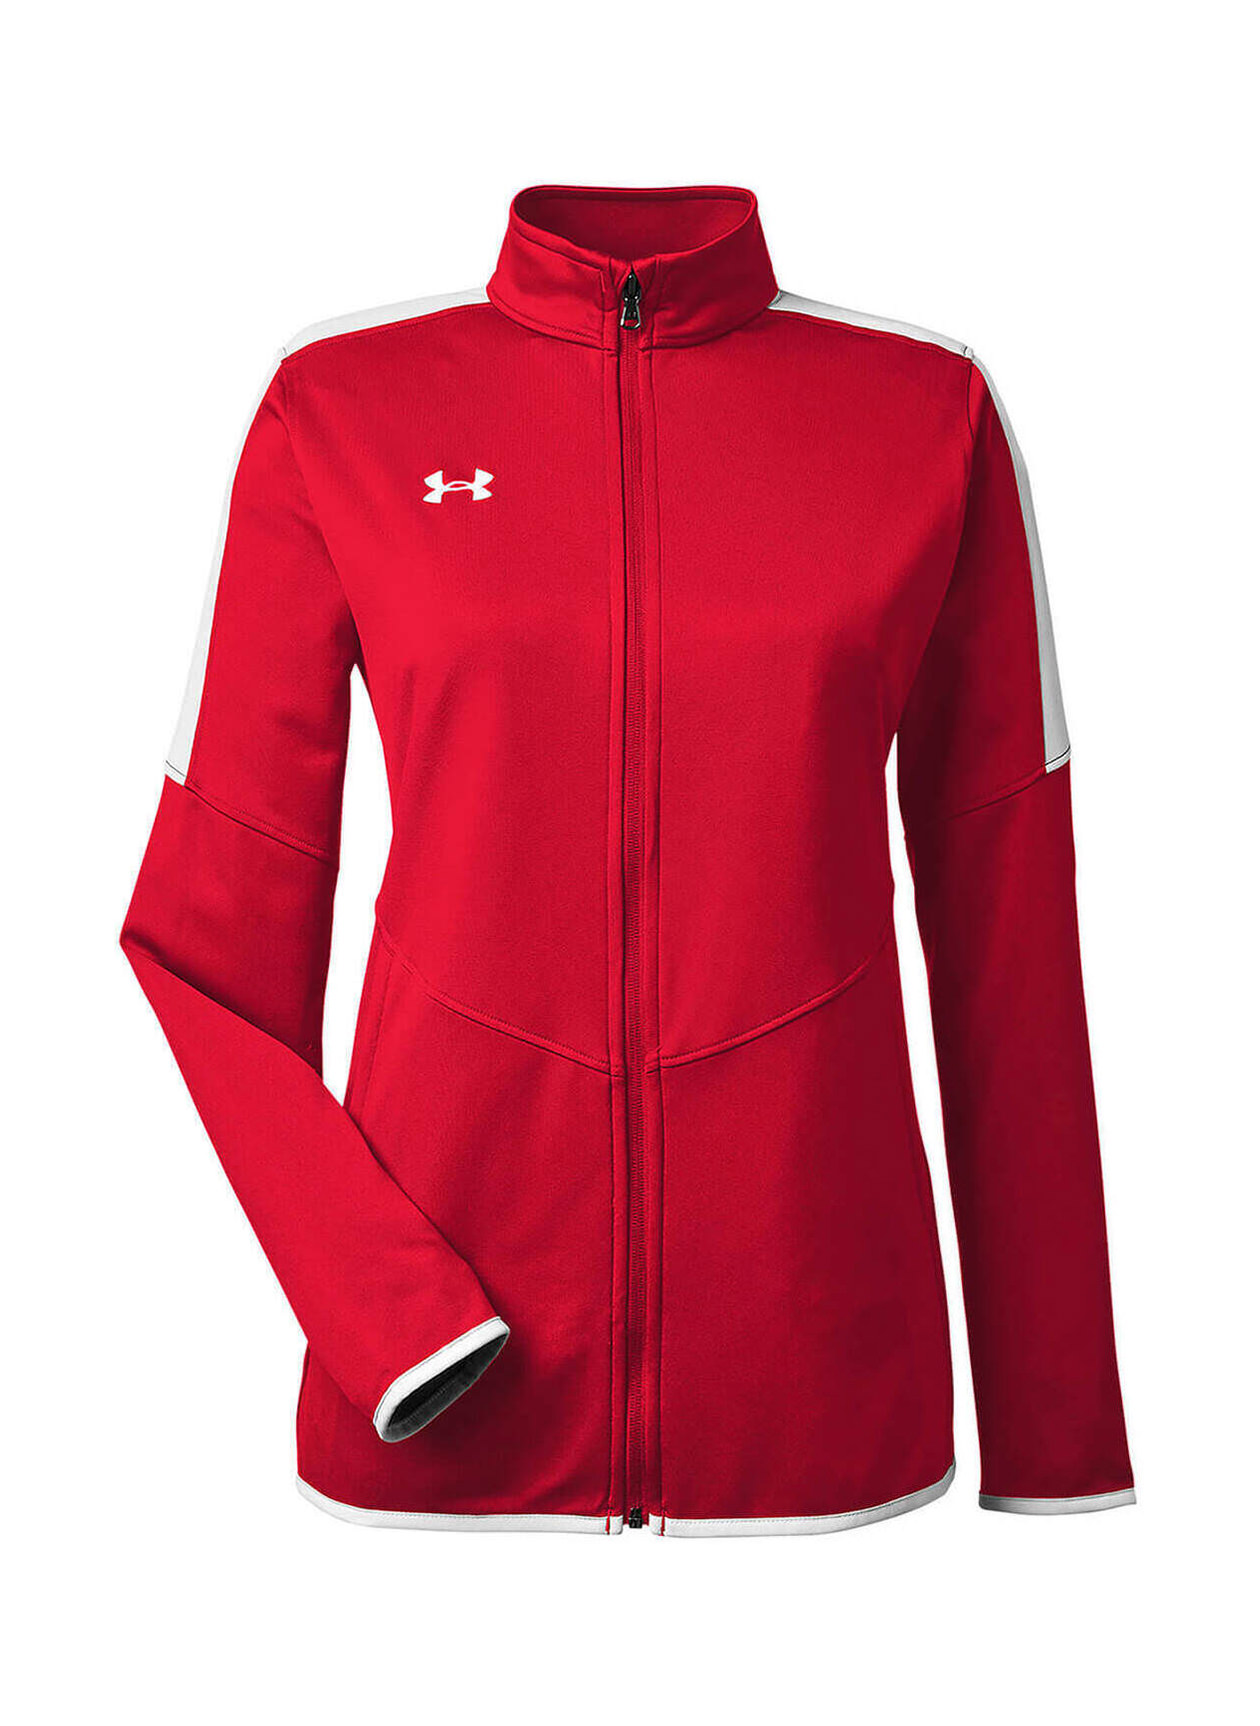 Under Armour Women's Red Rival Knit Jacket